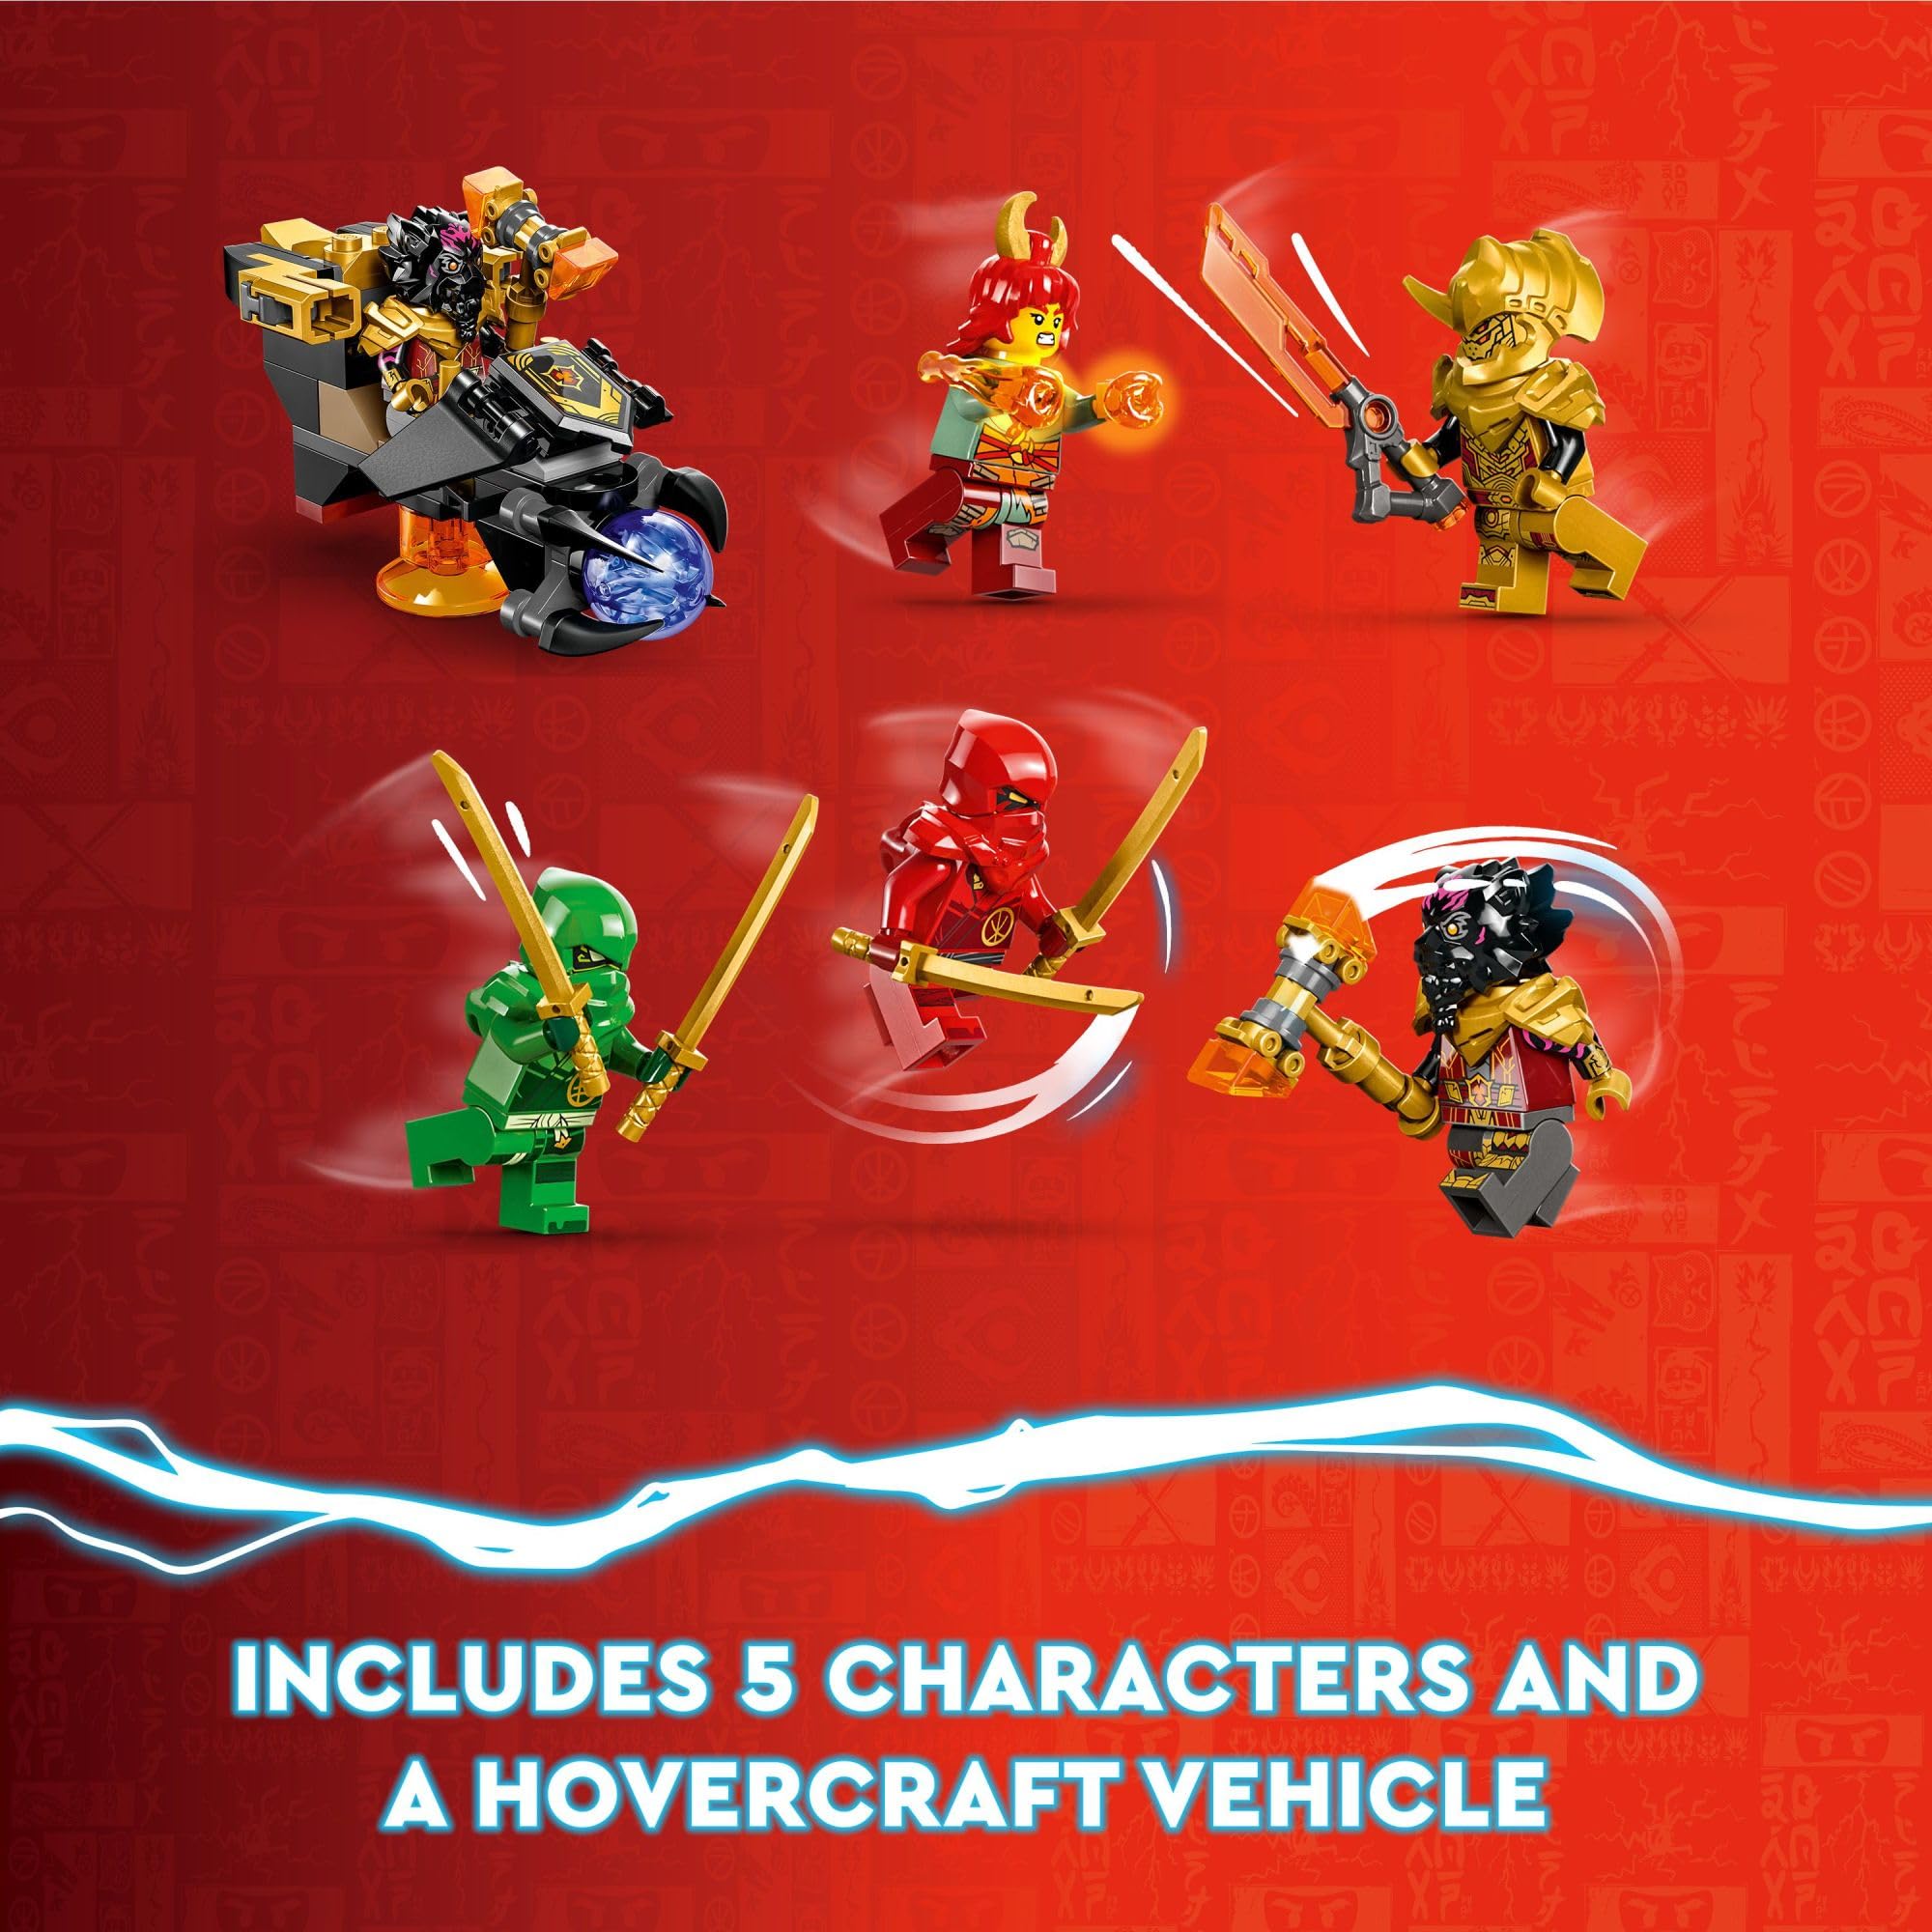 LEGO NINJAGO Heatwave Transforming Lava Dragon 71793 Building Toy Set, Features a Ninja Dragon, a Hovercraft Vehicle and 5 Minifigures, Lava Dragon Toy for Kids Ages 8+ Who Love Ninja Adventures